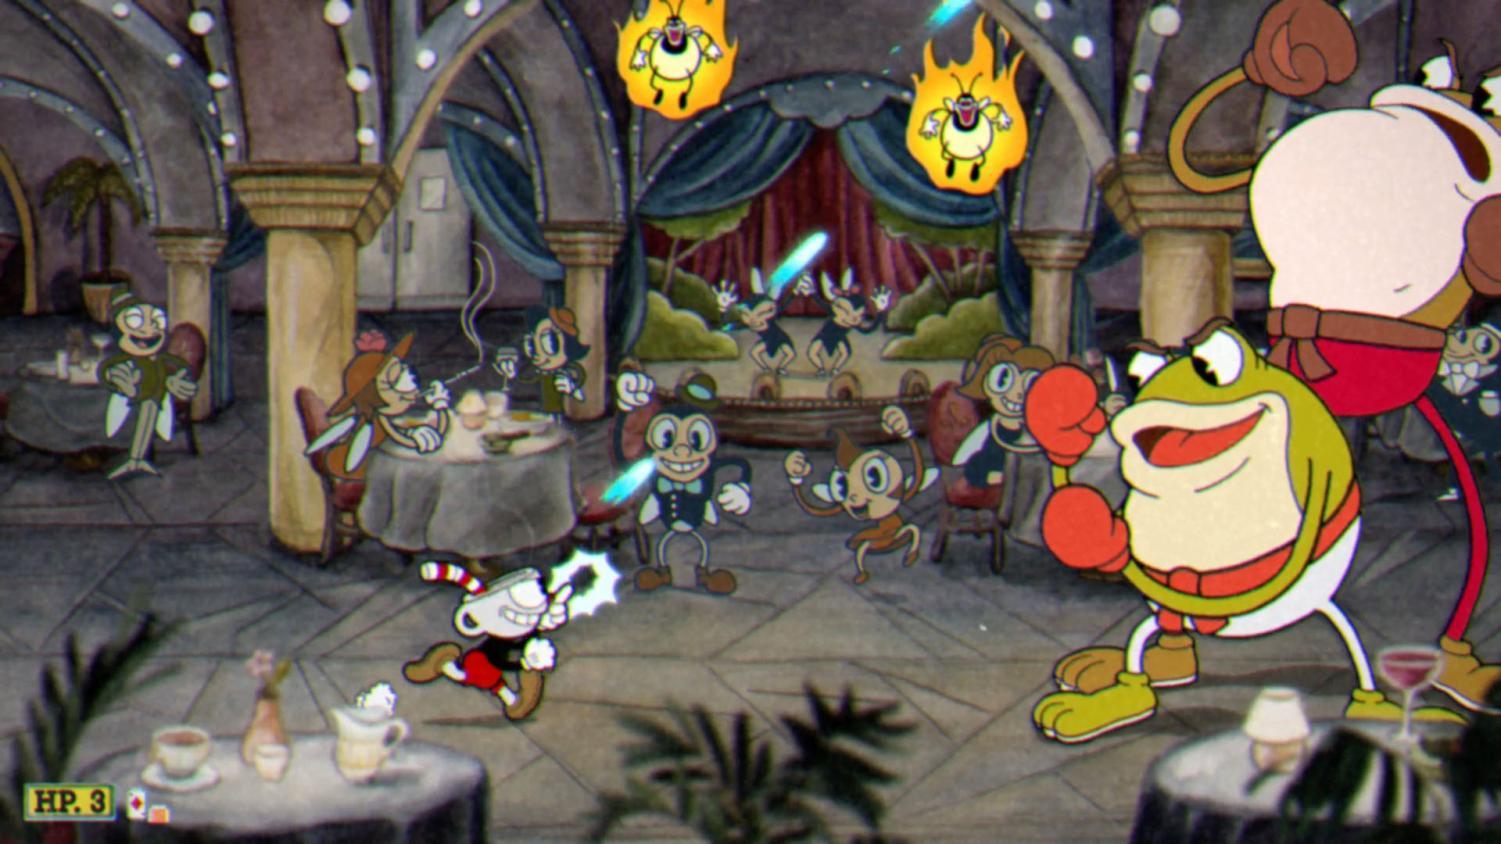 Cuphead Switch Review - The Indie Game Website